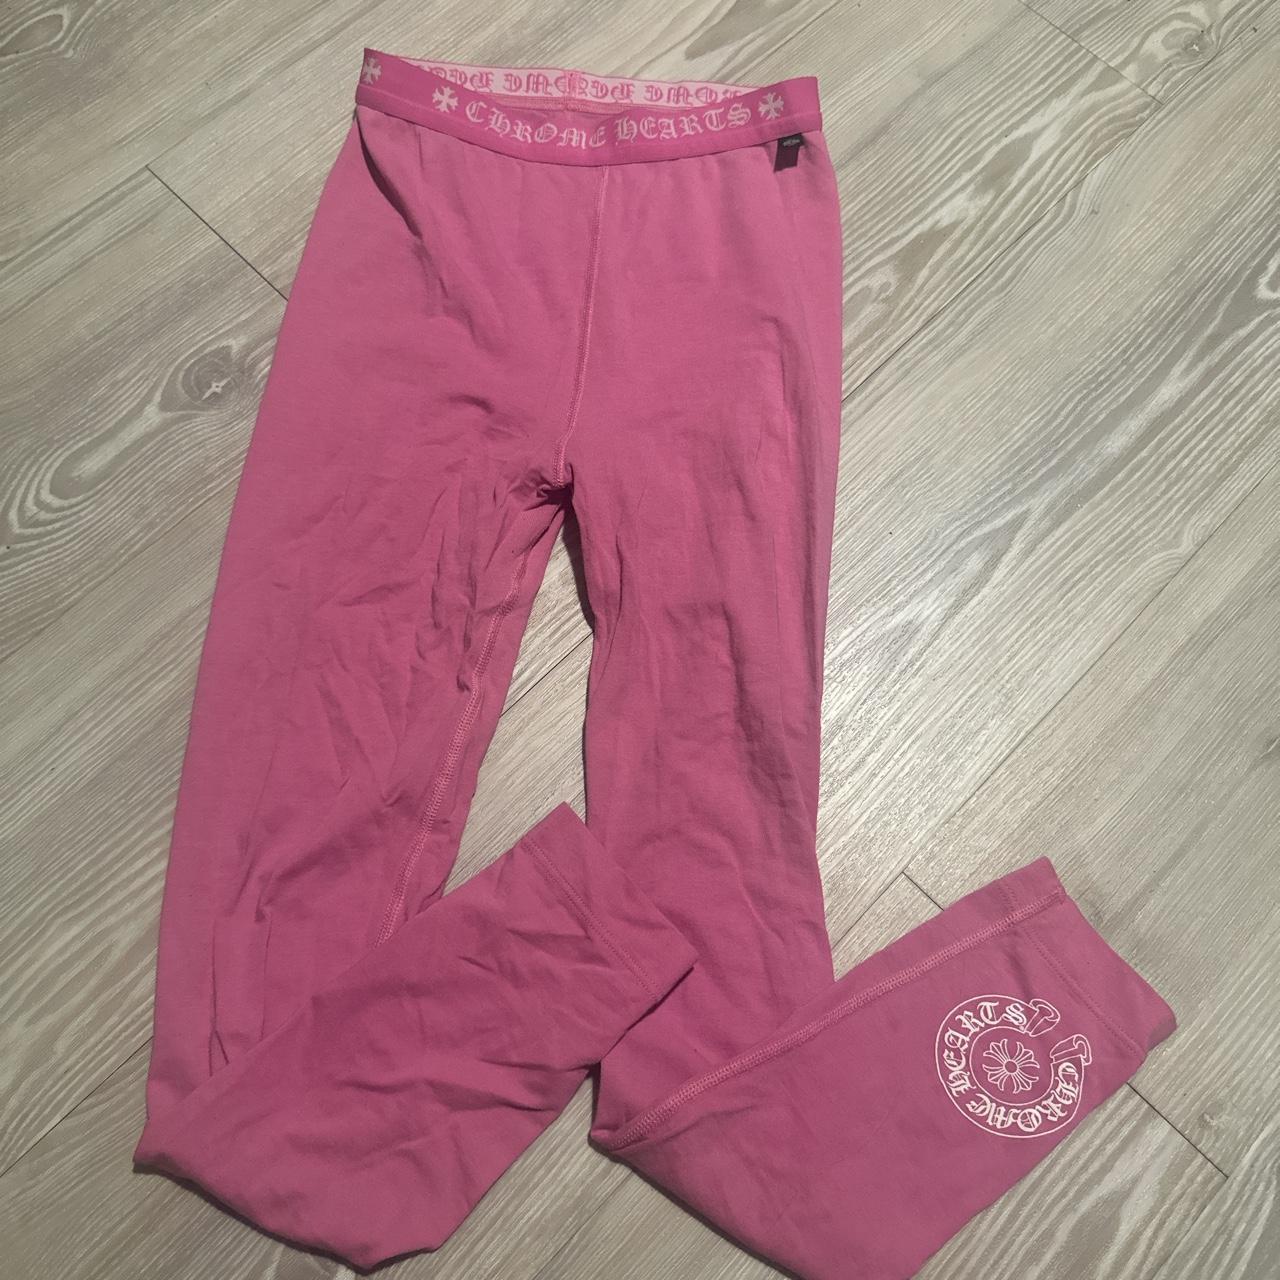 Chrome Hearts leggings size M Never worn, just tried - Depop